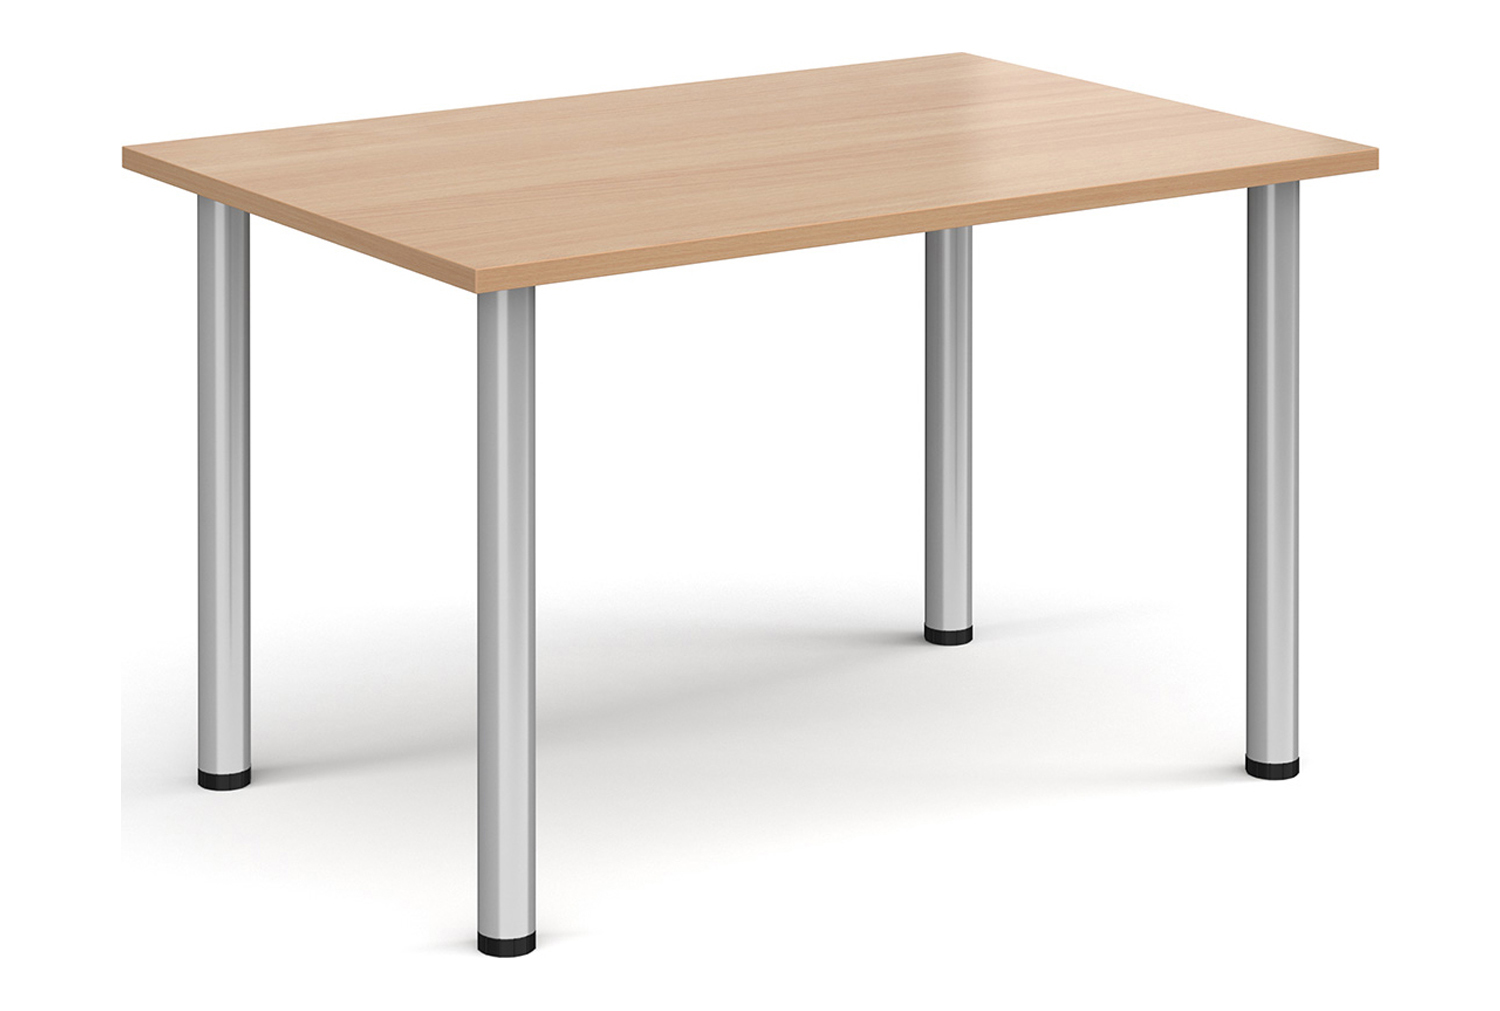 Pallas Rectangular Meeting Table, 120wx80dx73h (cm), Silver Frame, Beech, Fully Installed